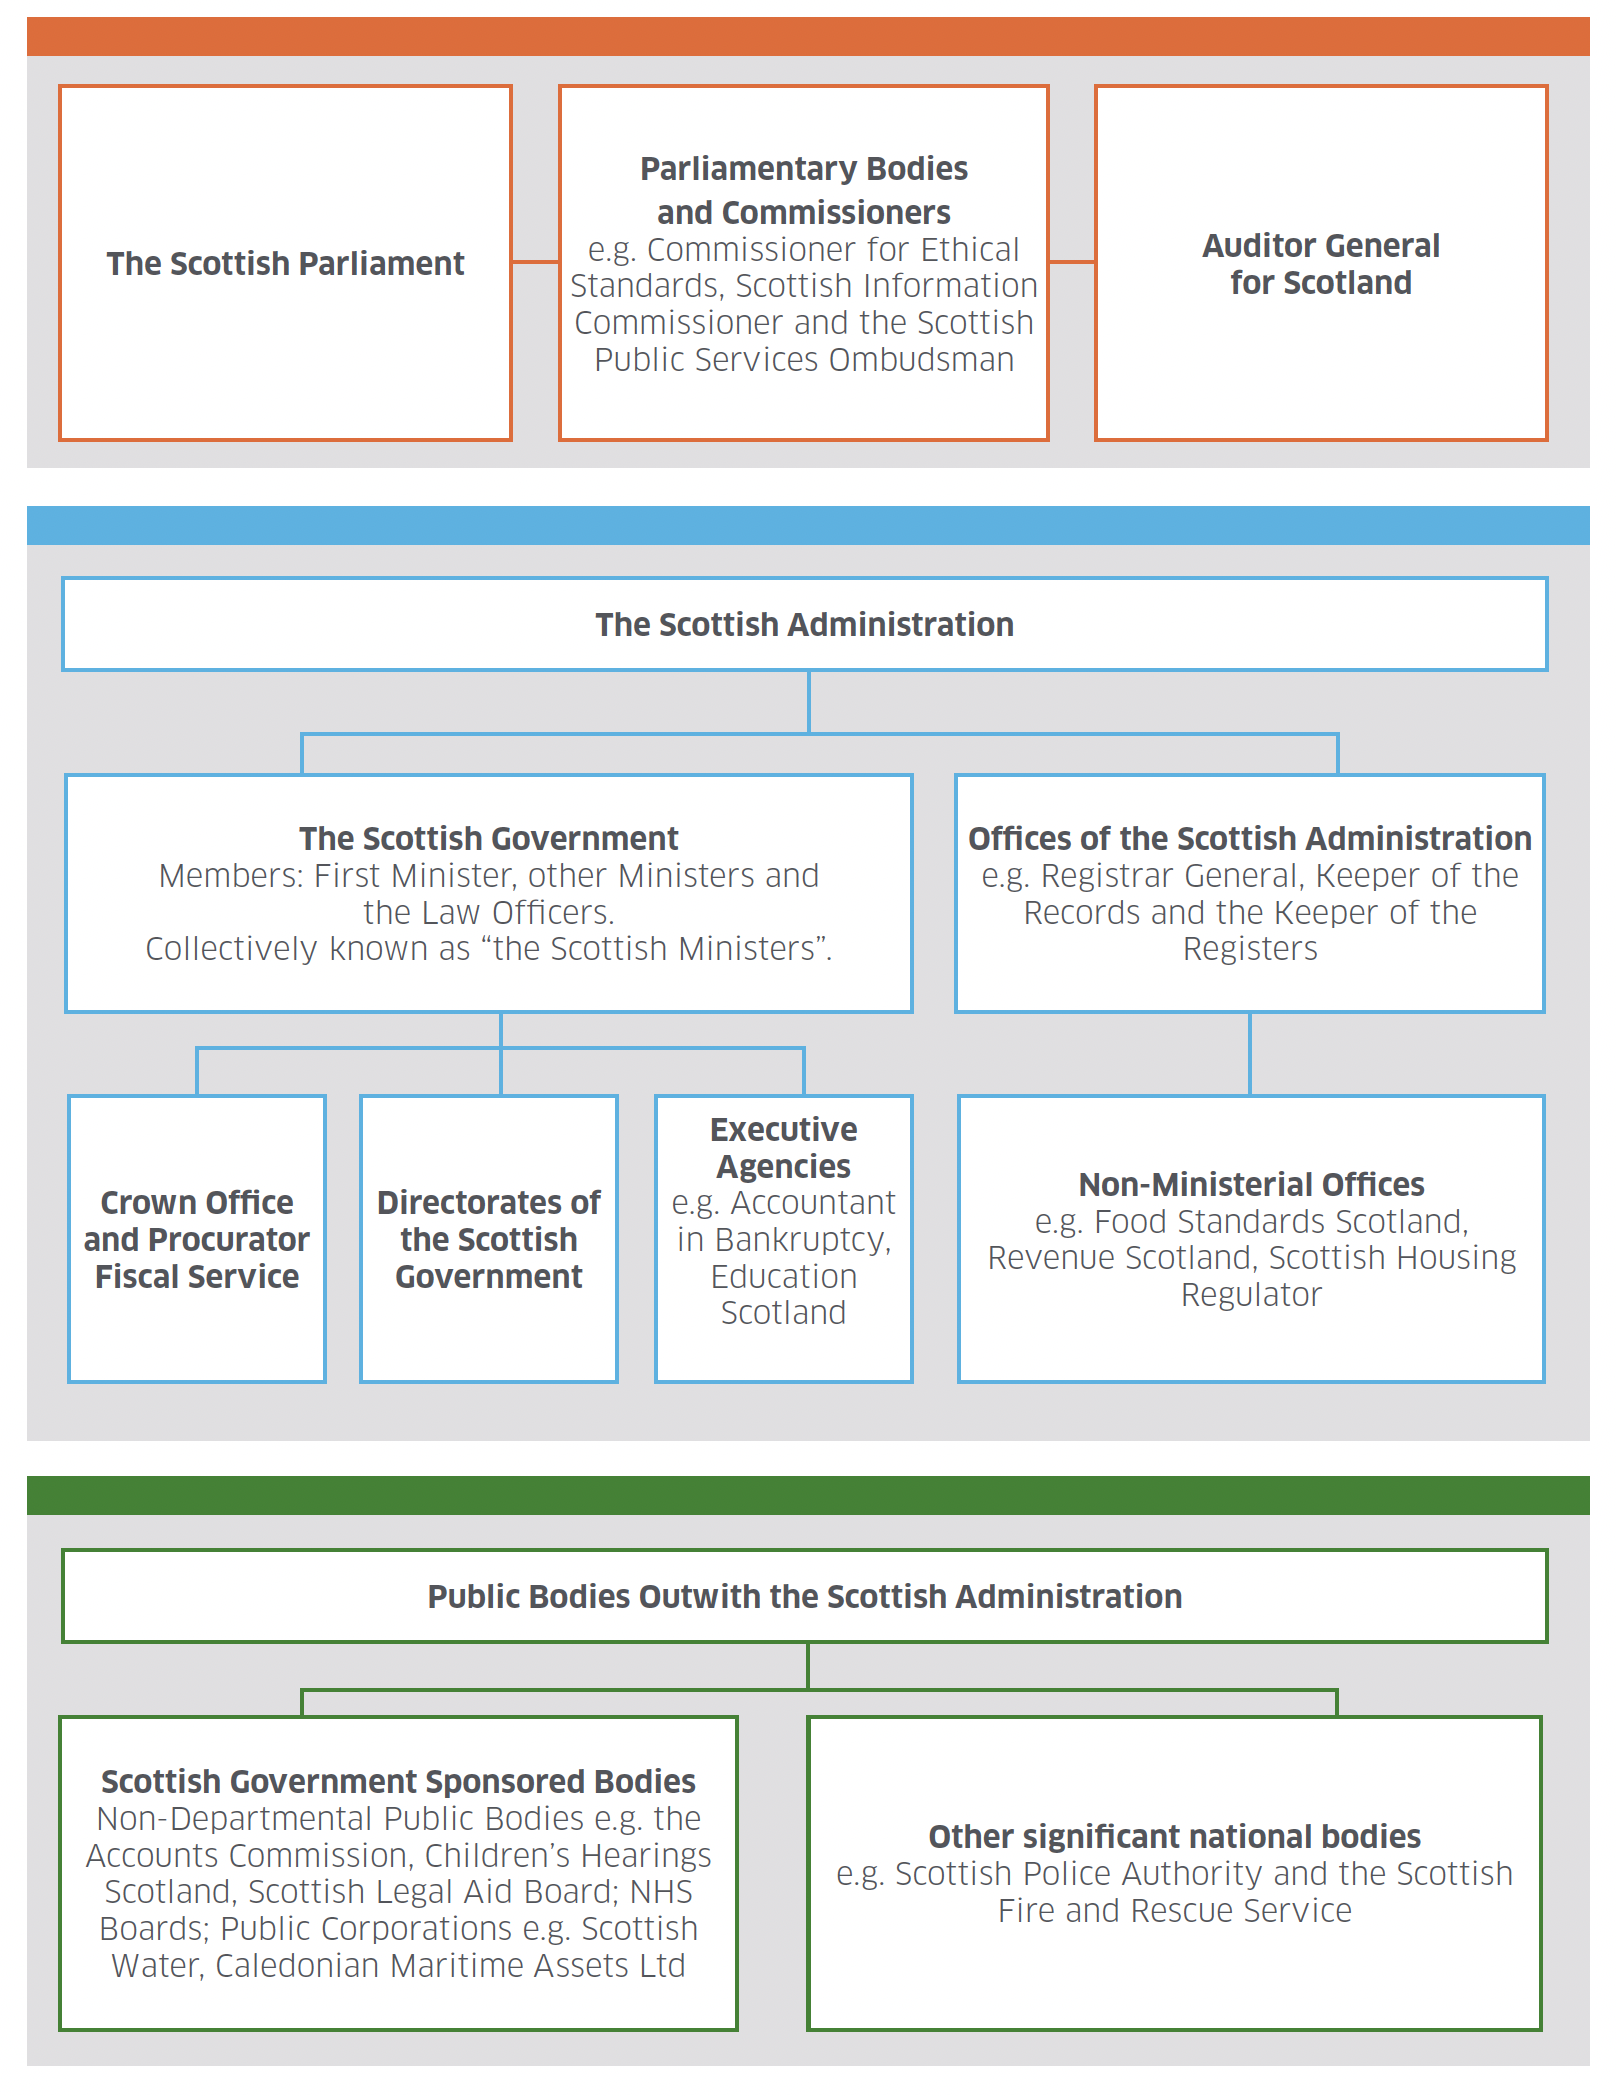 Diagram showing the structural organisation of Central Government over devolved matters in Scotland: The Scottish Parliament, the Scottish Administration and bodies outwith the Scottish Administration